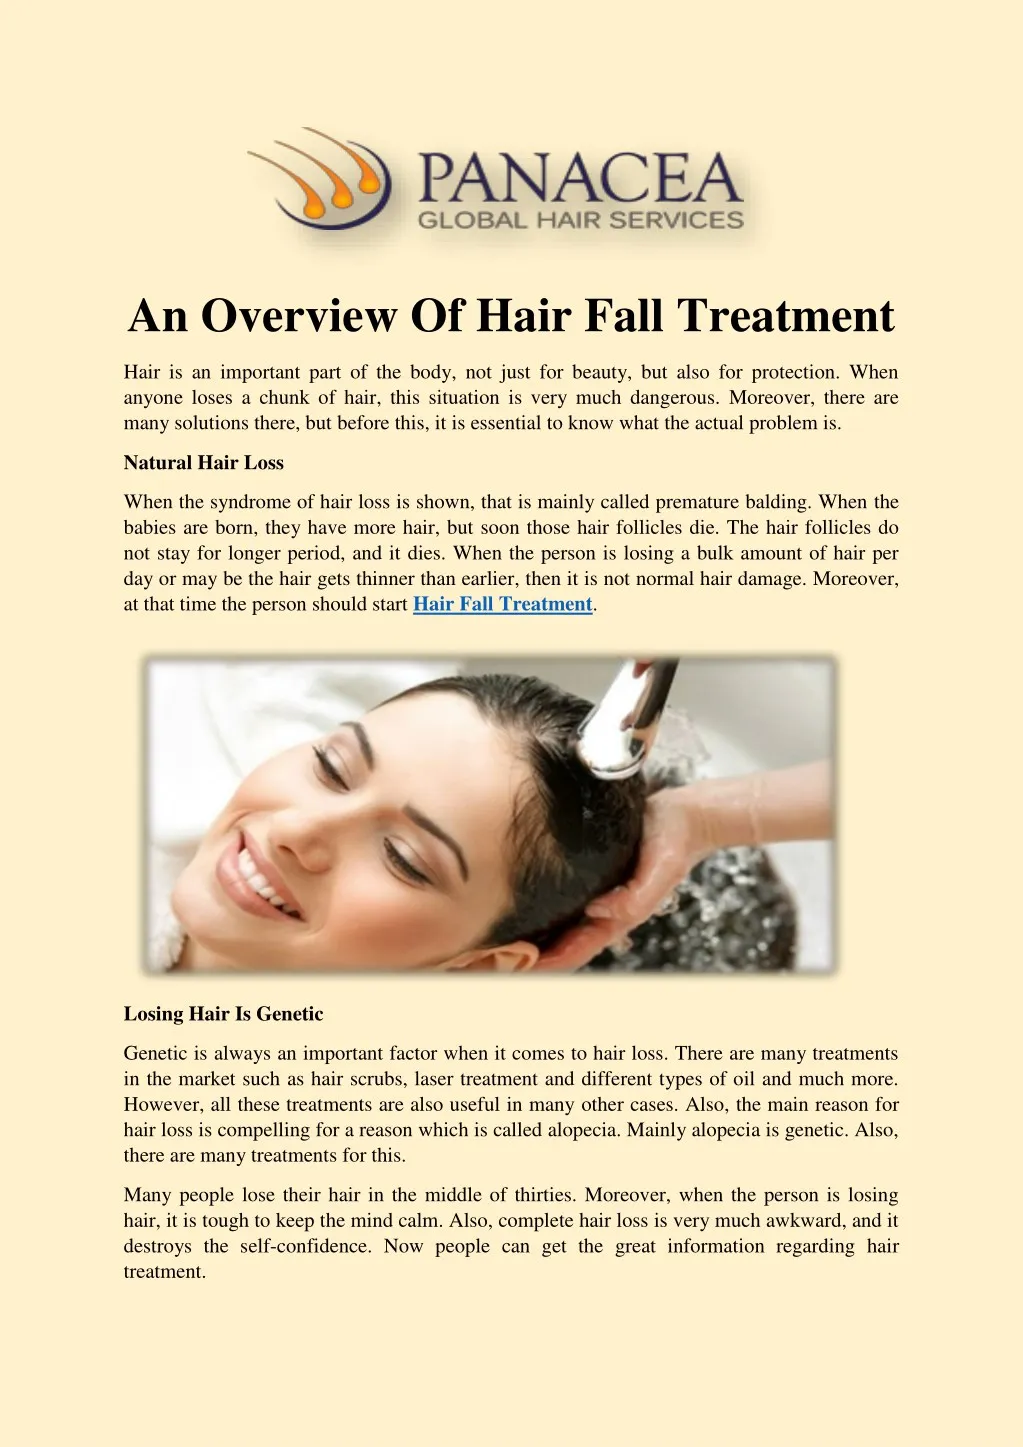 an overview of hair fall treatment